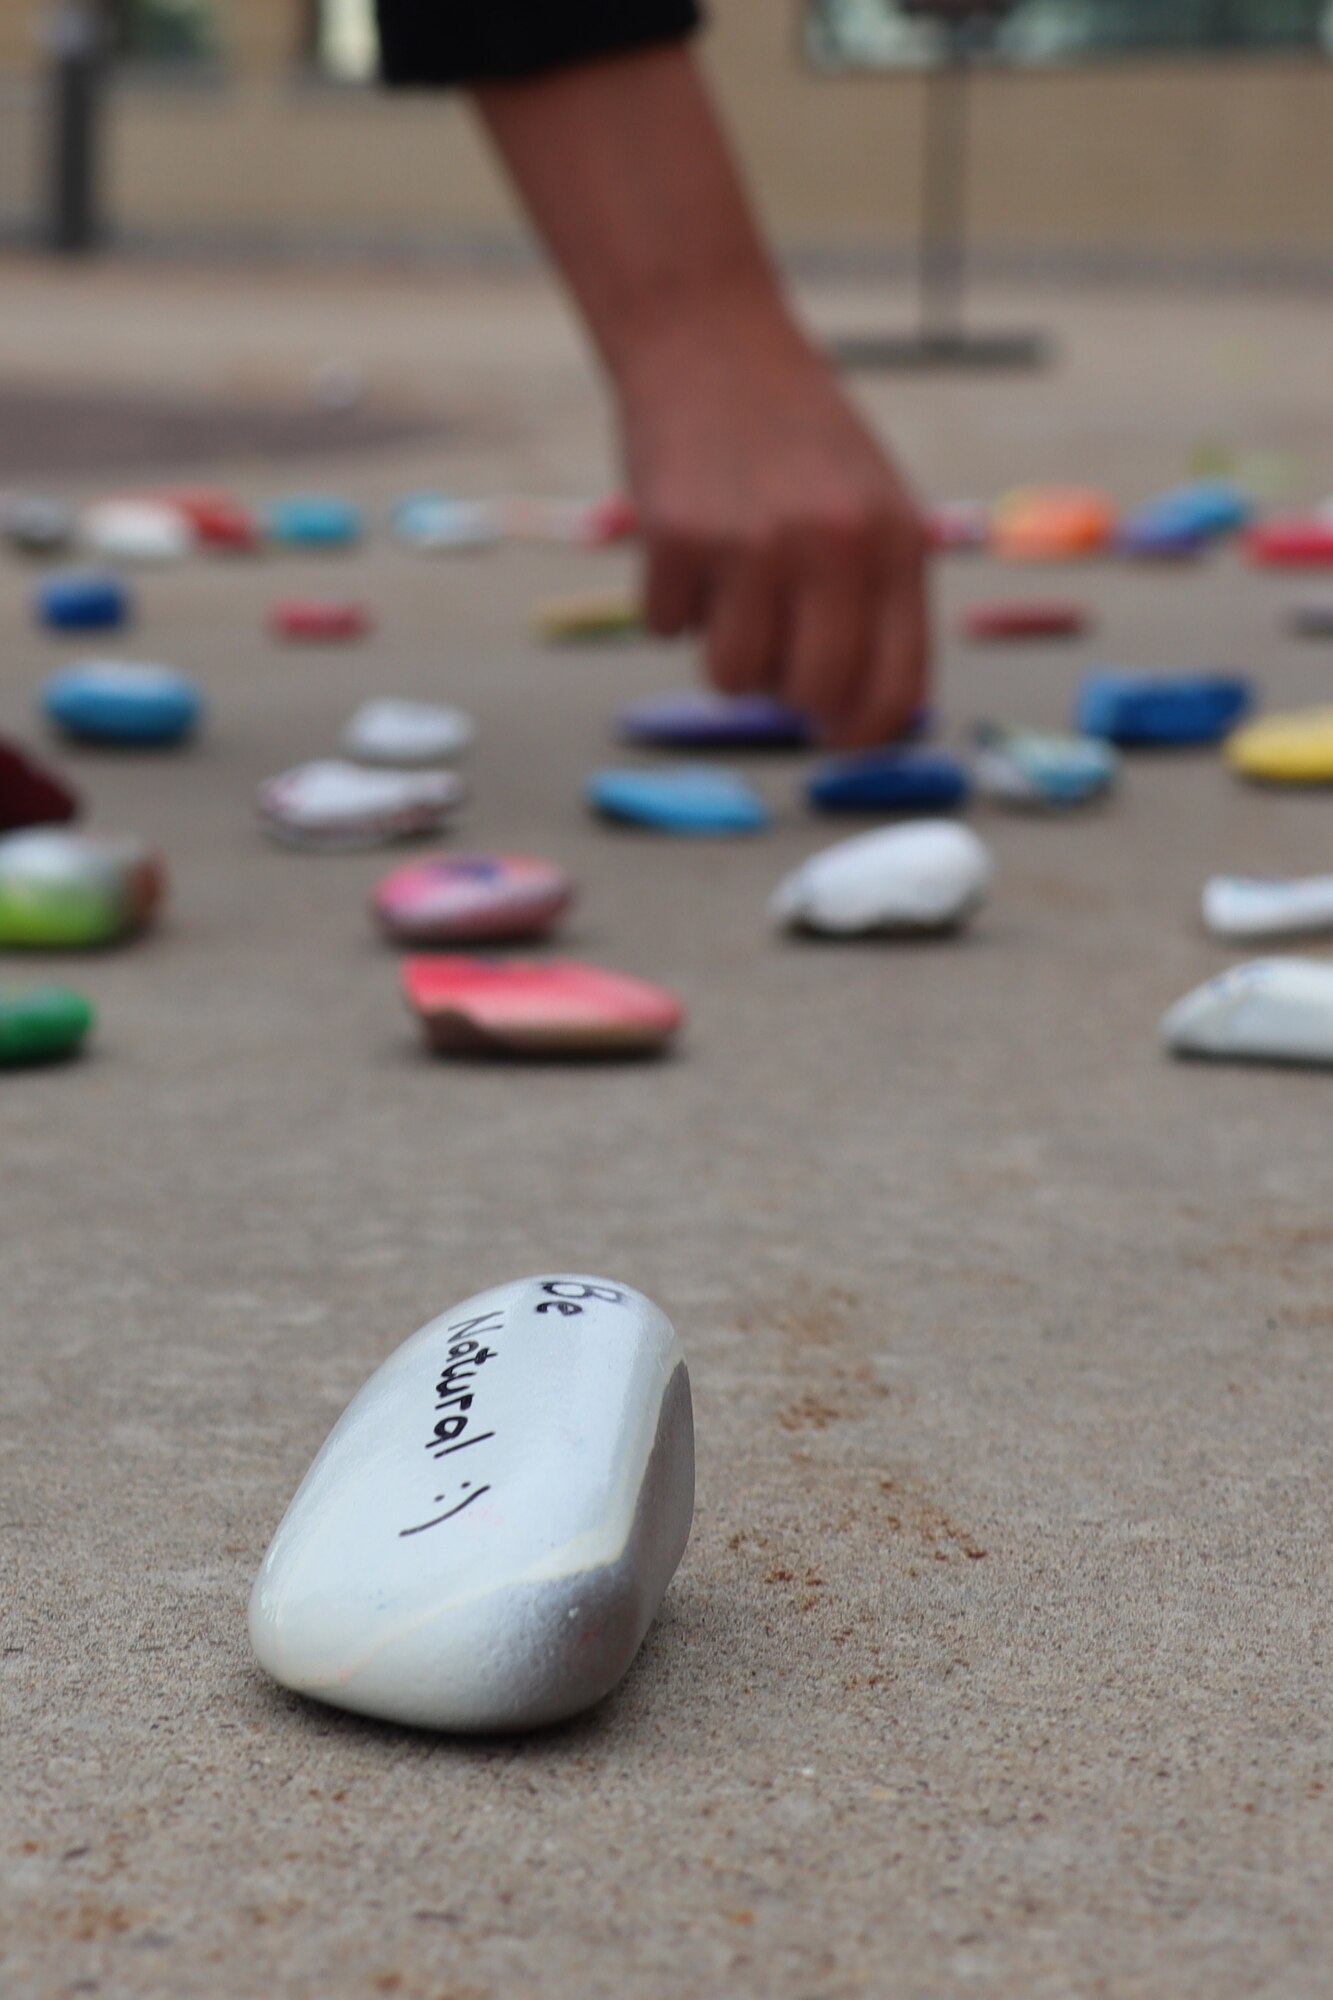 During Suicide Prevention Month, local middle schoolers teamed up with the 341st MDG to decorate rocks as a reminder that everybody matters and there are people out there who care.